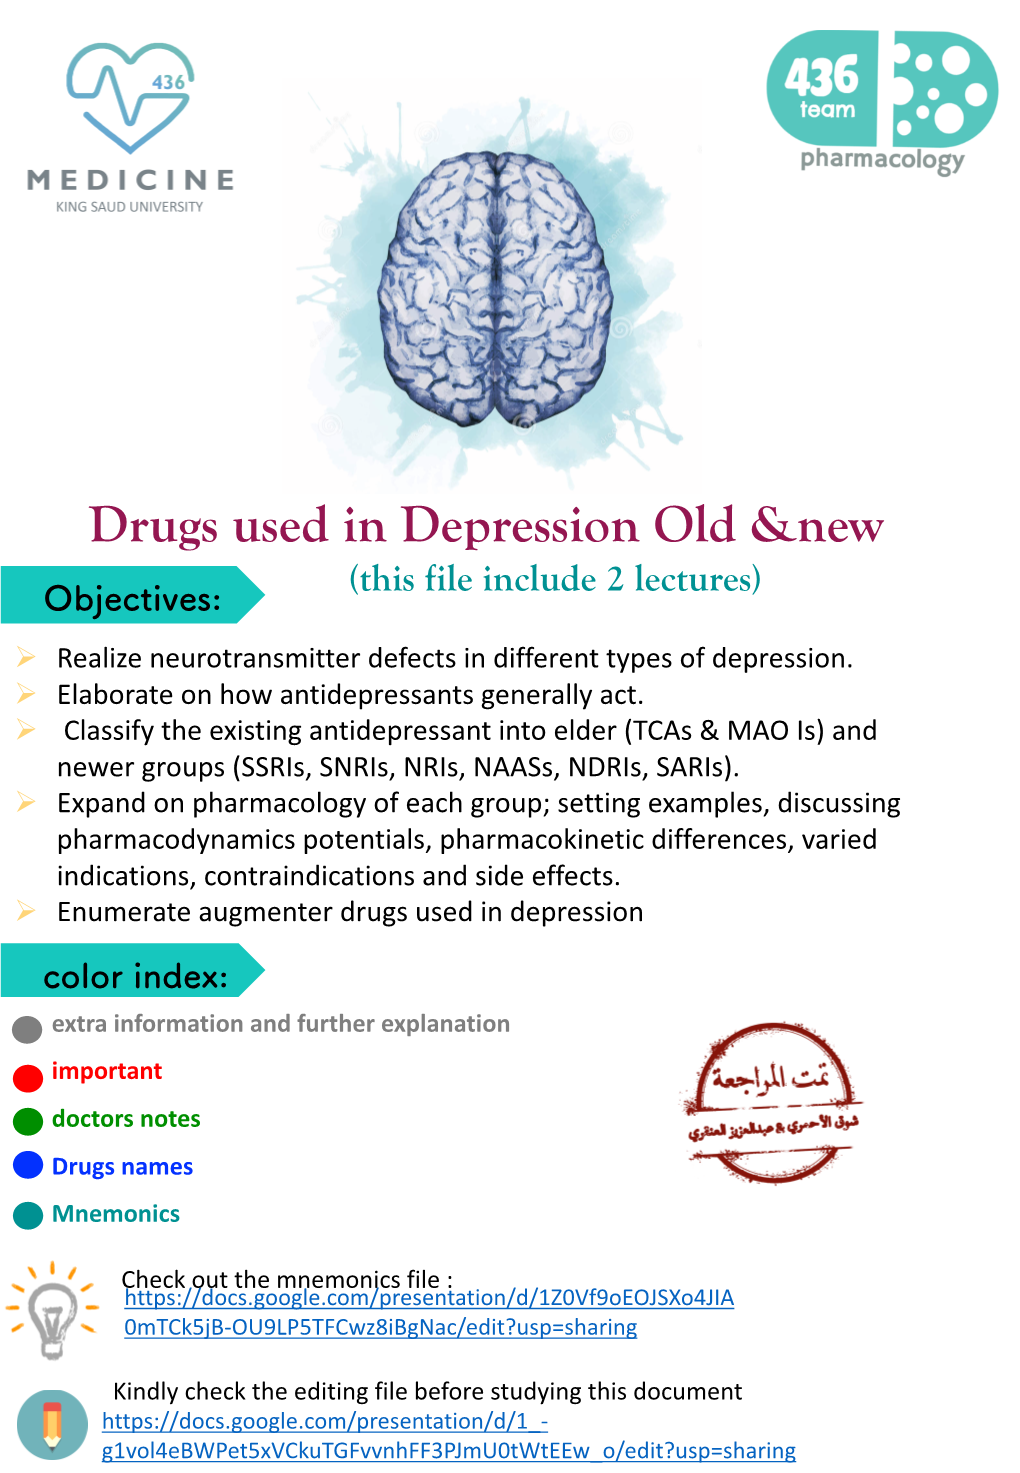 Drugs Used in Depression Old & New (Edited)